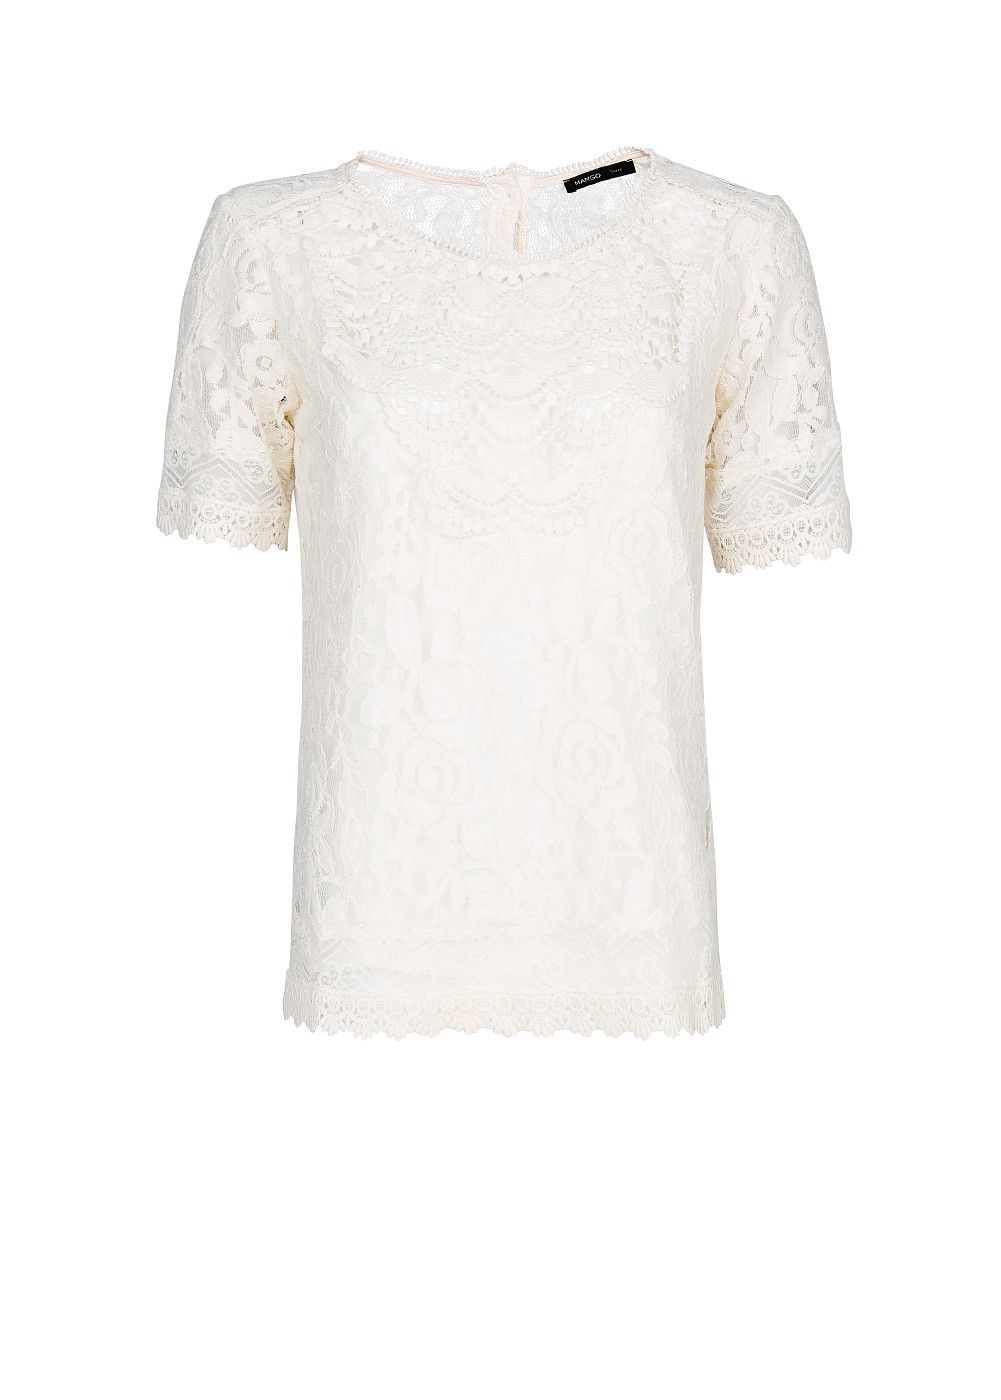 Mango Guipure Embellished Lace Blouse in Natural | Lyst